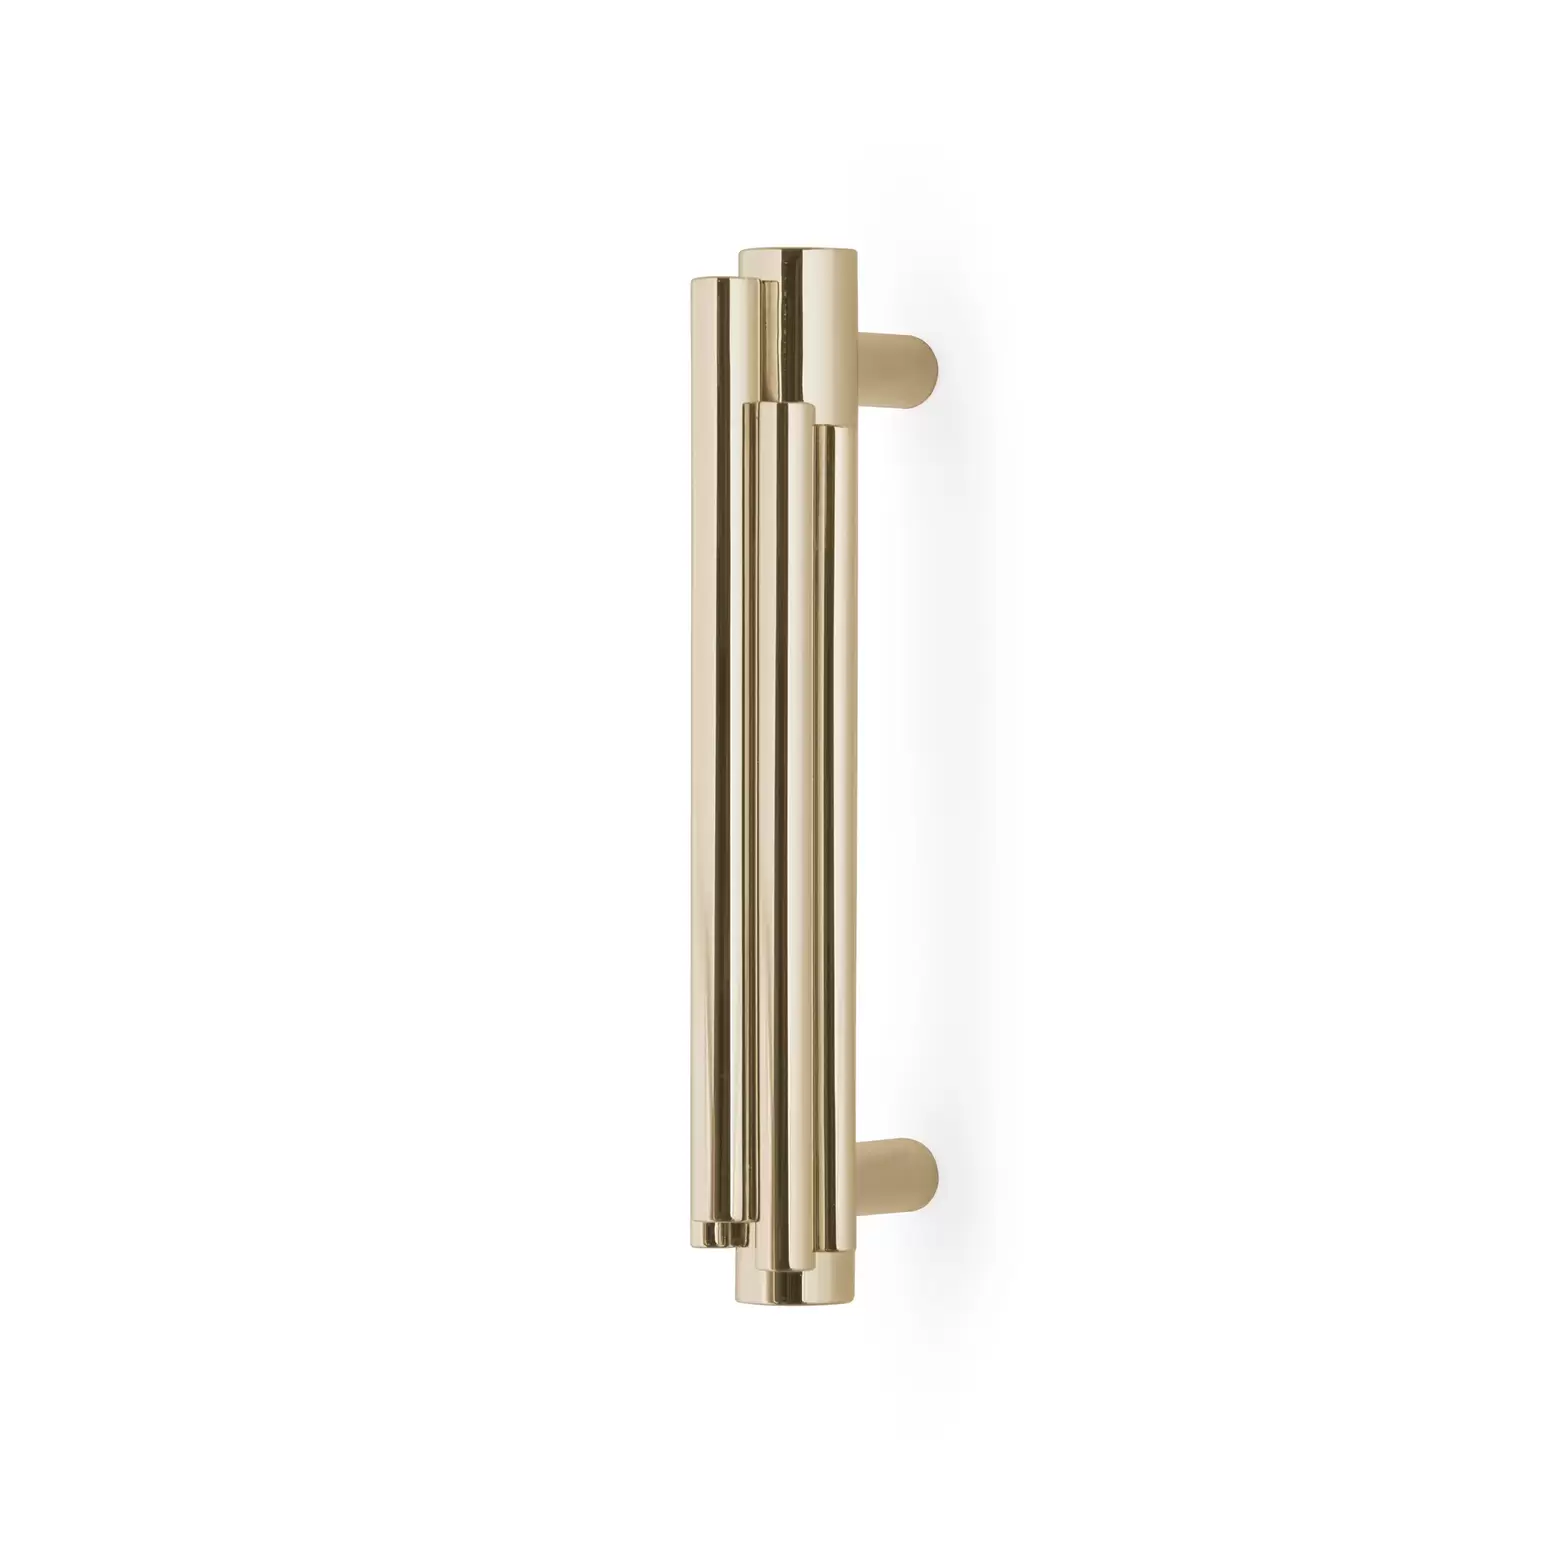 DRAWER HANDLES TO TRANSFORM YOUR SPACE